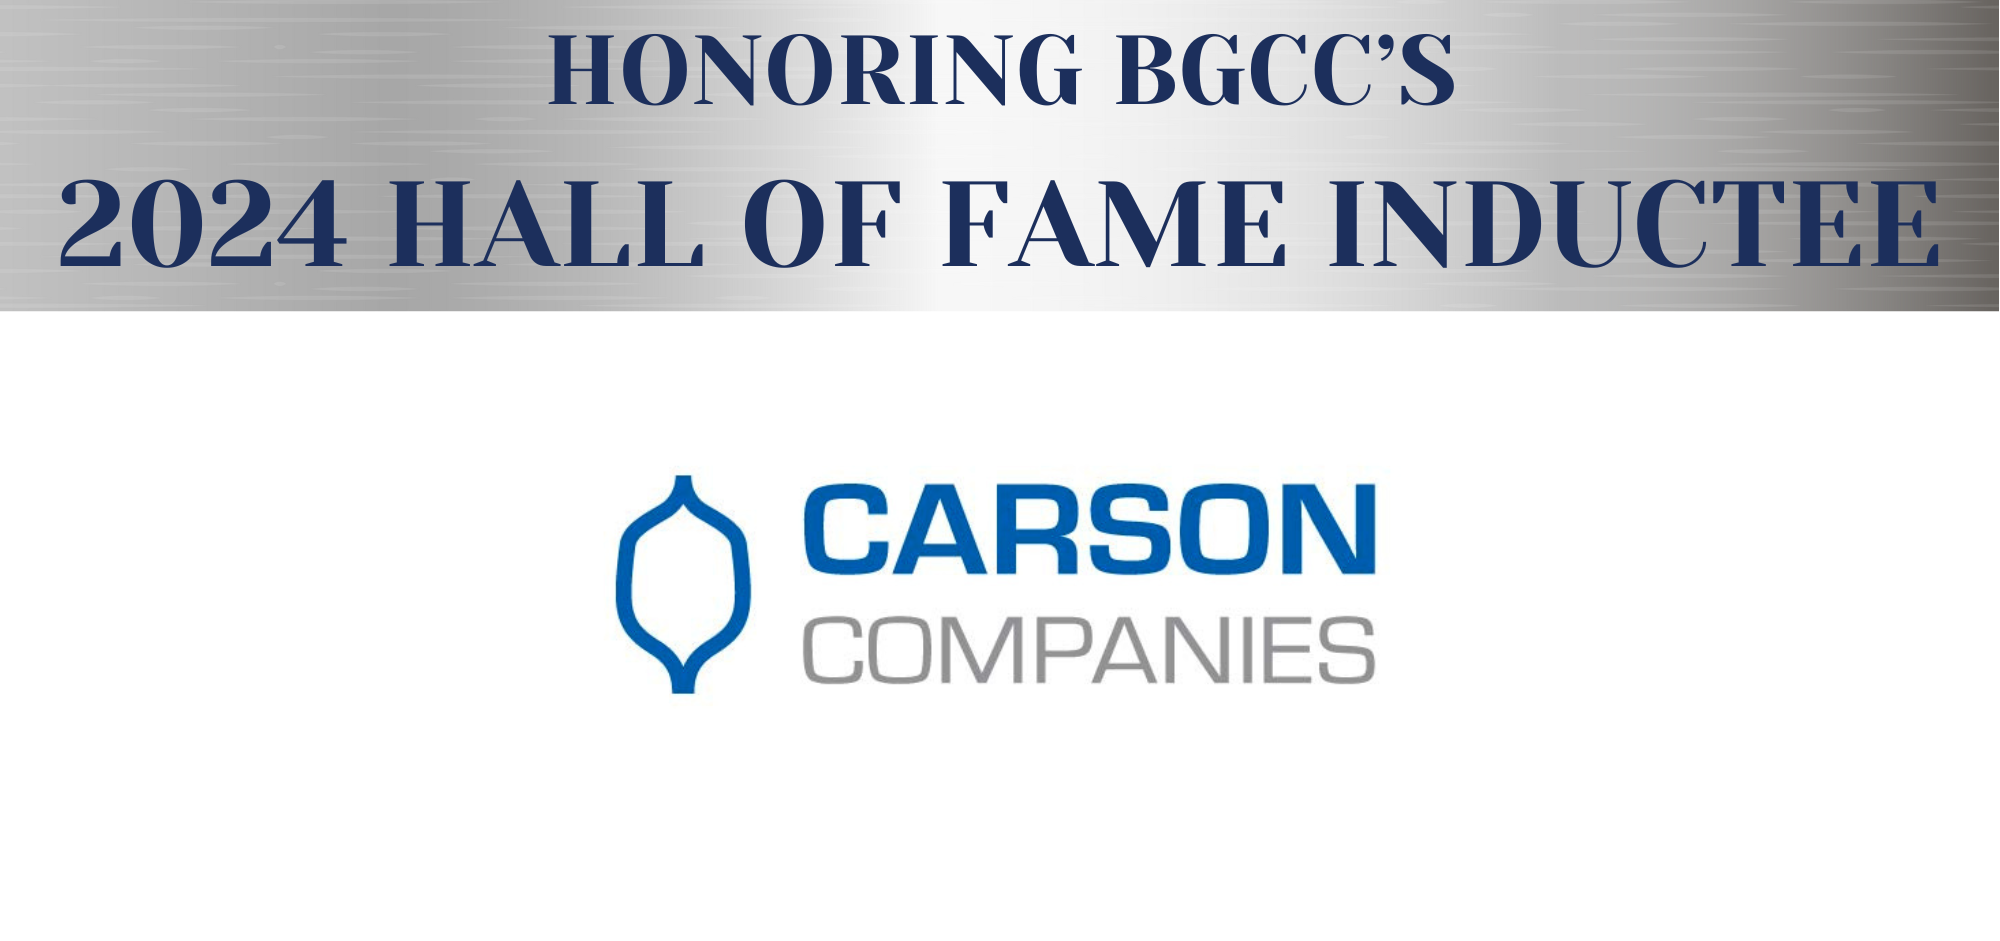 Honoring Carson Companies as the 2024 BGCC Hall of Fame